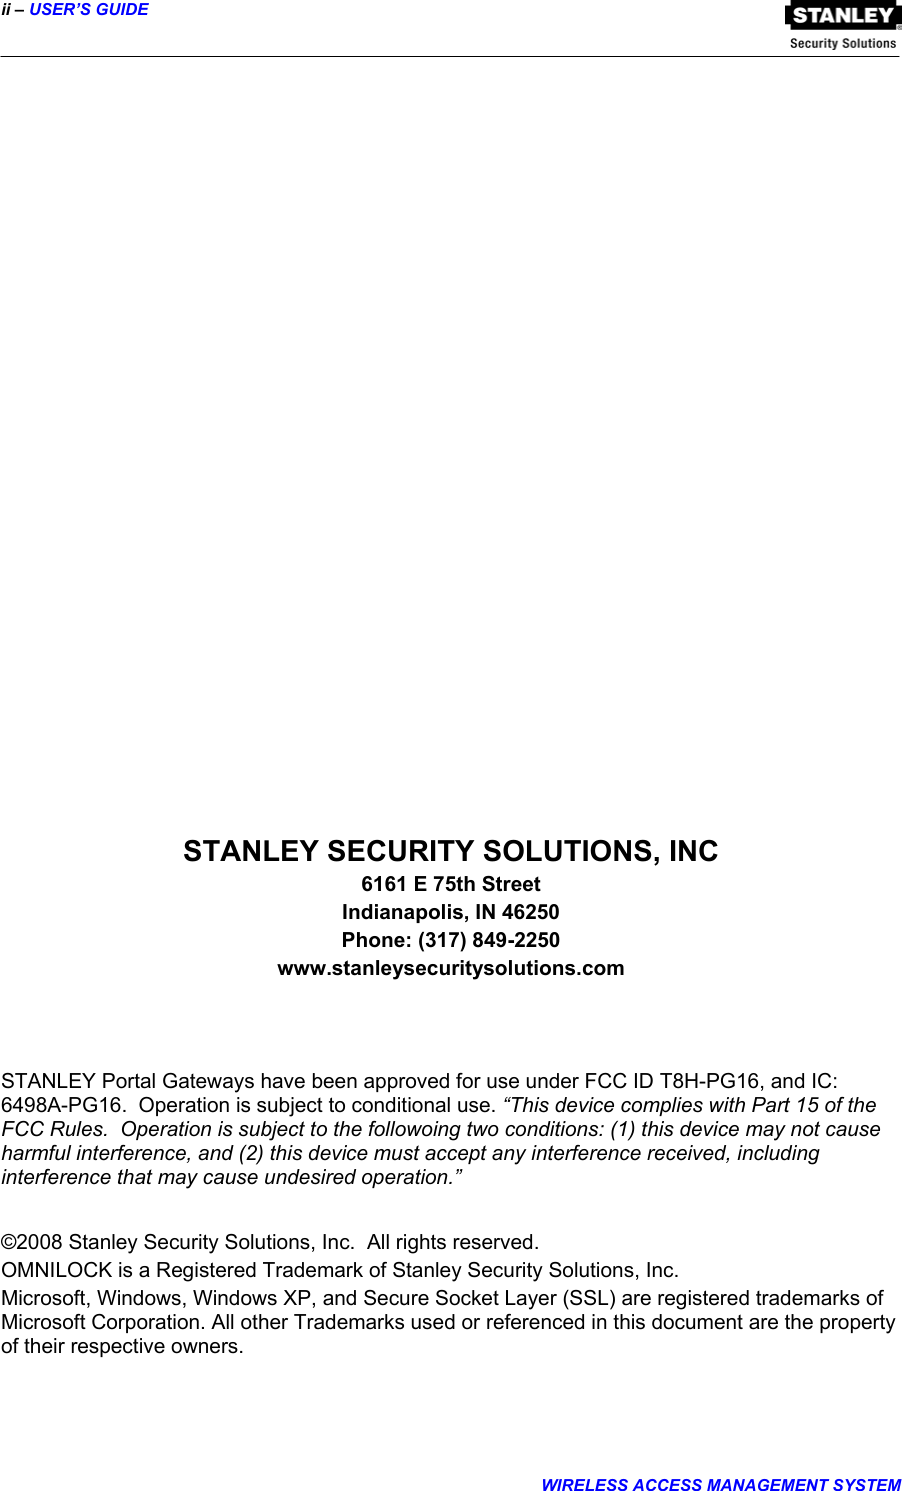 ii – USER’S GUIDE  WIRELESS ACCESS MANAGEMENT SYSTEM                            STANLEY SECURITY SOLUTIONS, INC 6161 E 75th Street Indianapolis, IN 46250 Phone: (317) 849-2250 www.stanleysecuritysolutions.com    STANLEY Portal Gateways have been approved for use under FCC ID T8H-PG16, and IC: 6498A-PG16.  Operation is subject to conditional use. “This device complies with Part 15 of the FCC Rules.  Operation is subject to the followoing two conditions: (1) this device may not cause harmful interference, and (2) this device must accept any interference received, including interference that may cause undesired operation.”  ©2008 Stanley Security Solutions, Inc.  All rights reserved. OMNILOCK is a Registered Trademark of Stanley Security Solutions, Inc. Microsoft, Windows, Windows XP, and Secure Socket Layer (SSL) are registered trademarks of Microsoft Corporation. All other Trademarks used or referenced in this document are the property of their respective owners. 